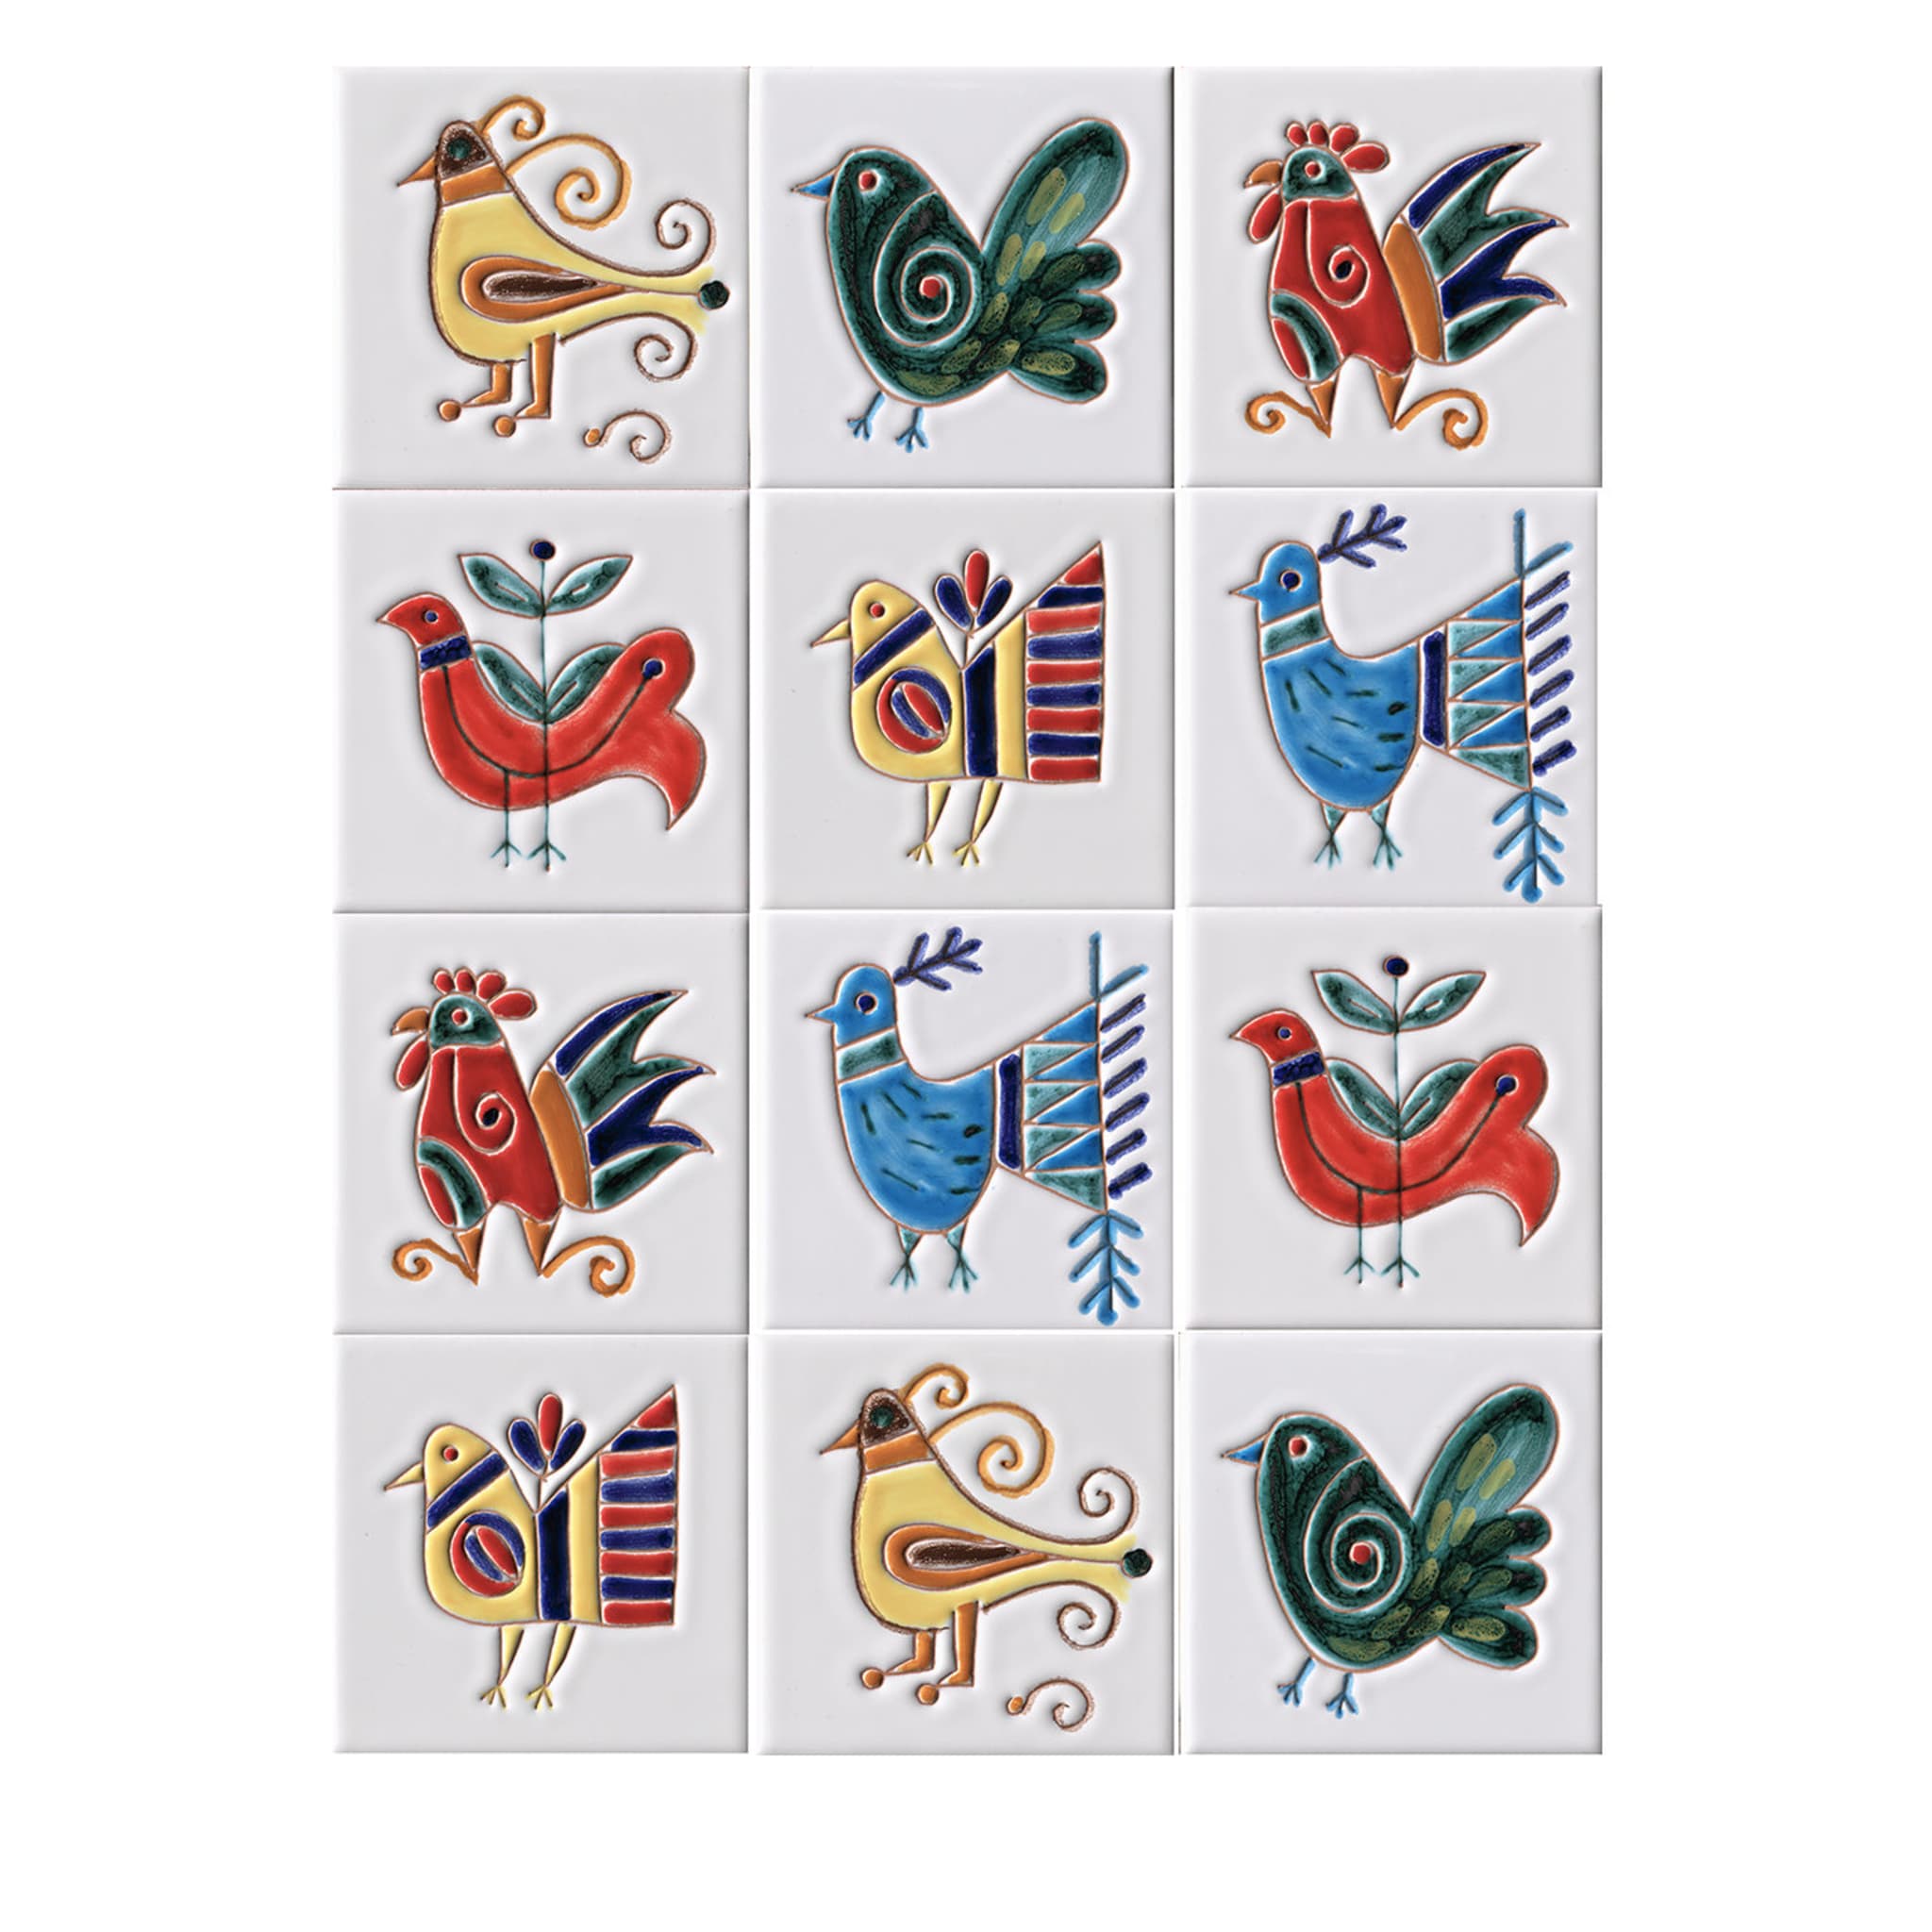 I Classici Pavoncelle Set of 12 Tiles - Main view